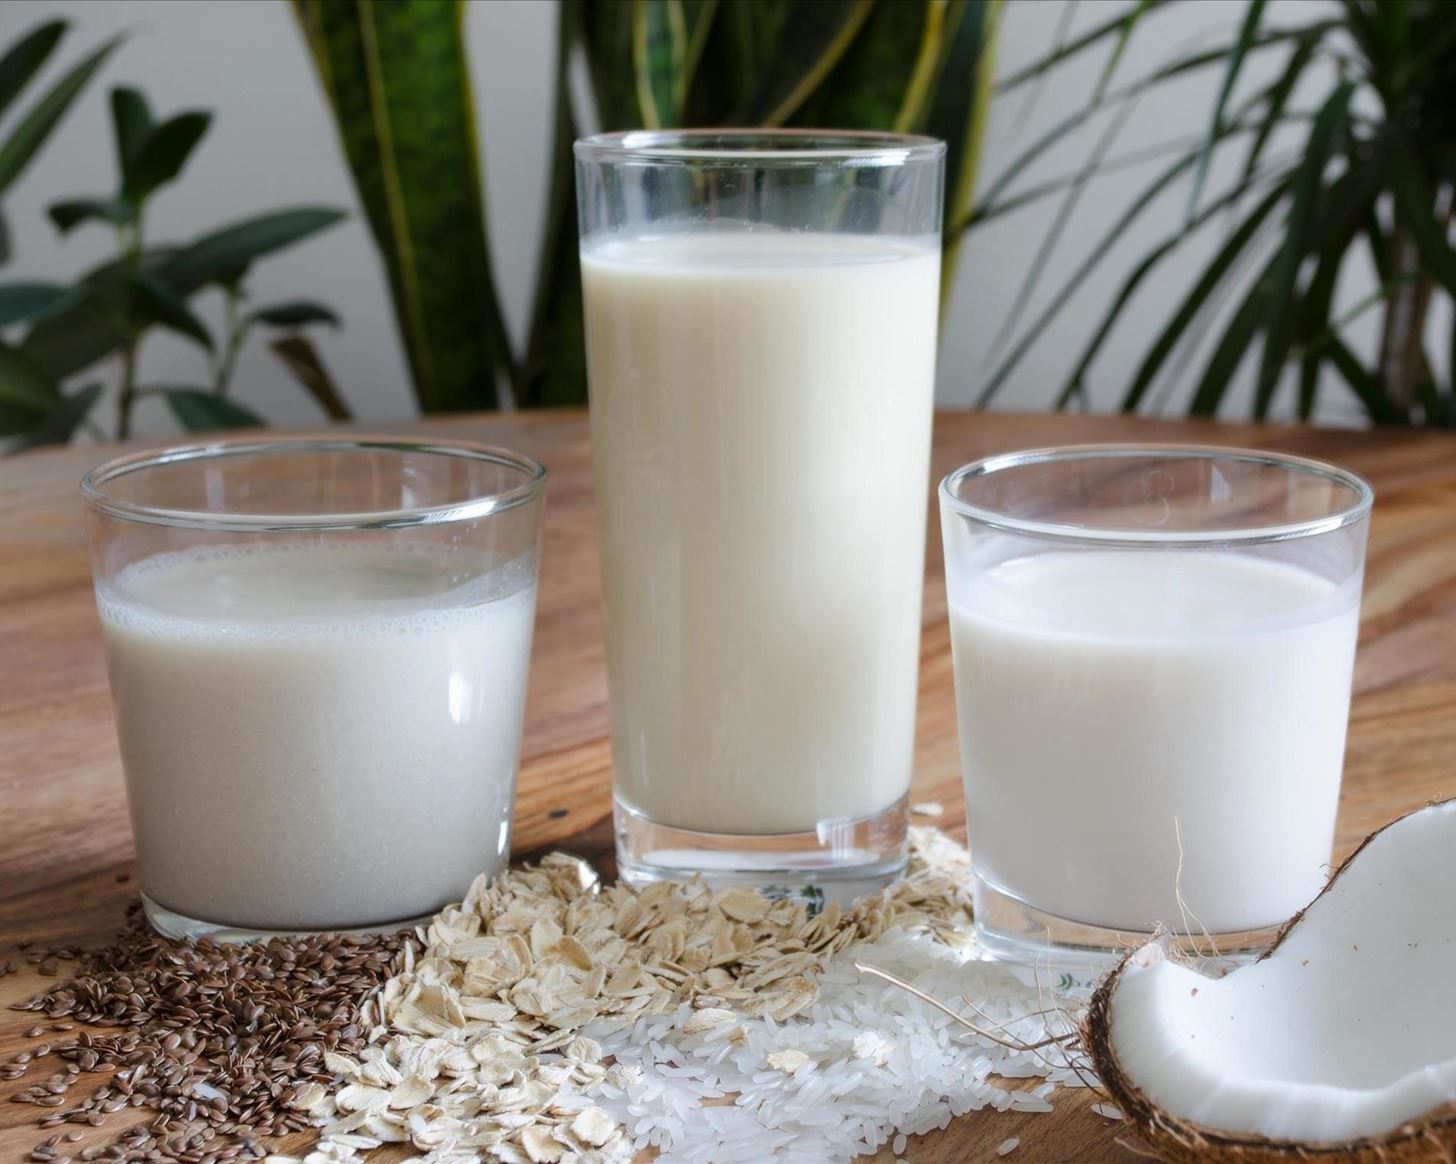 When You're Sick of Almond & Soy, Try These 5 Milk Alternatives